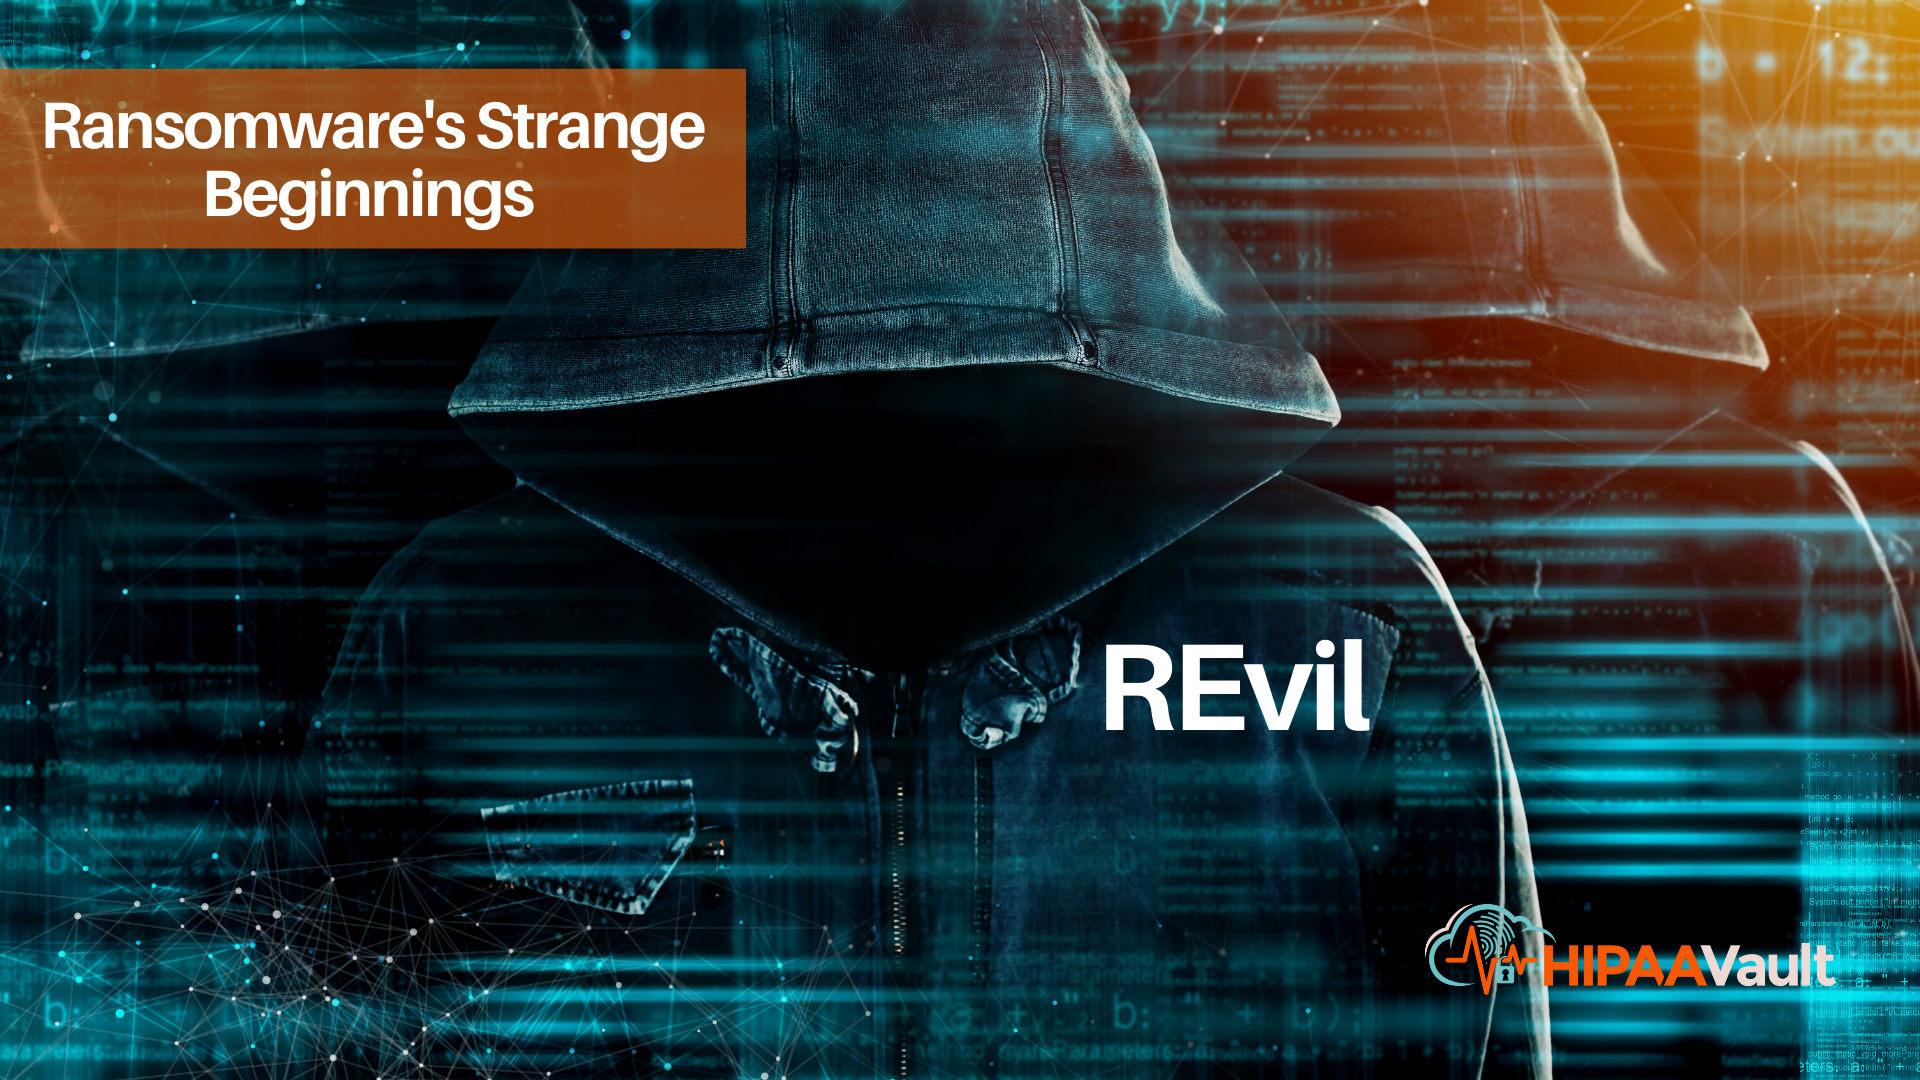 REvil and the Strange Rise of Ransomware